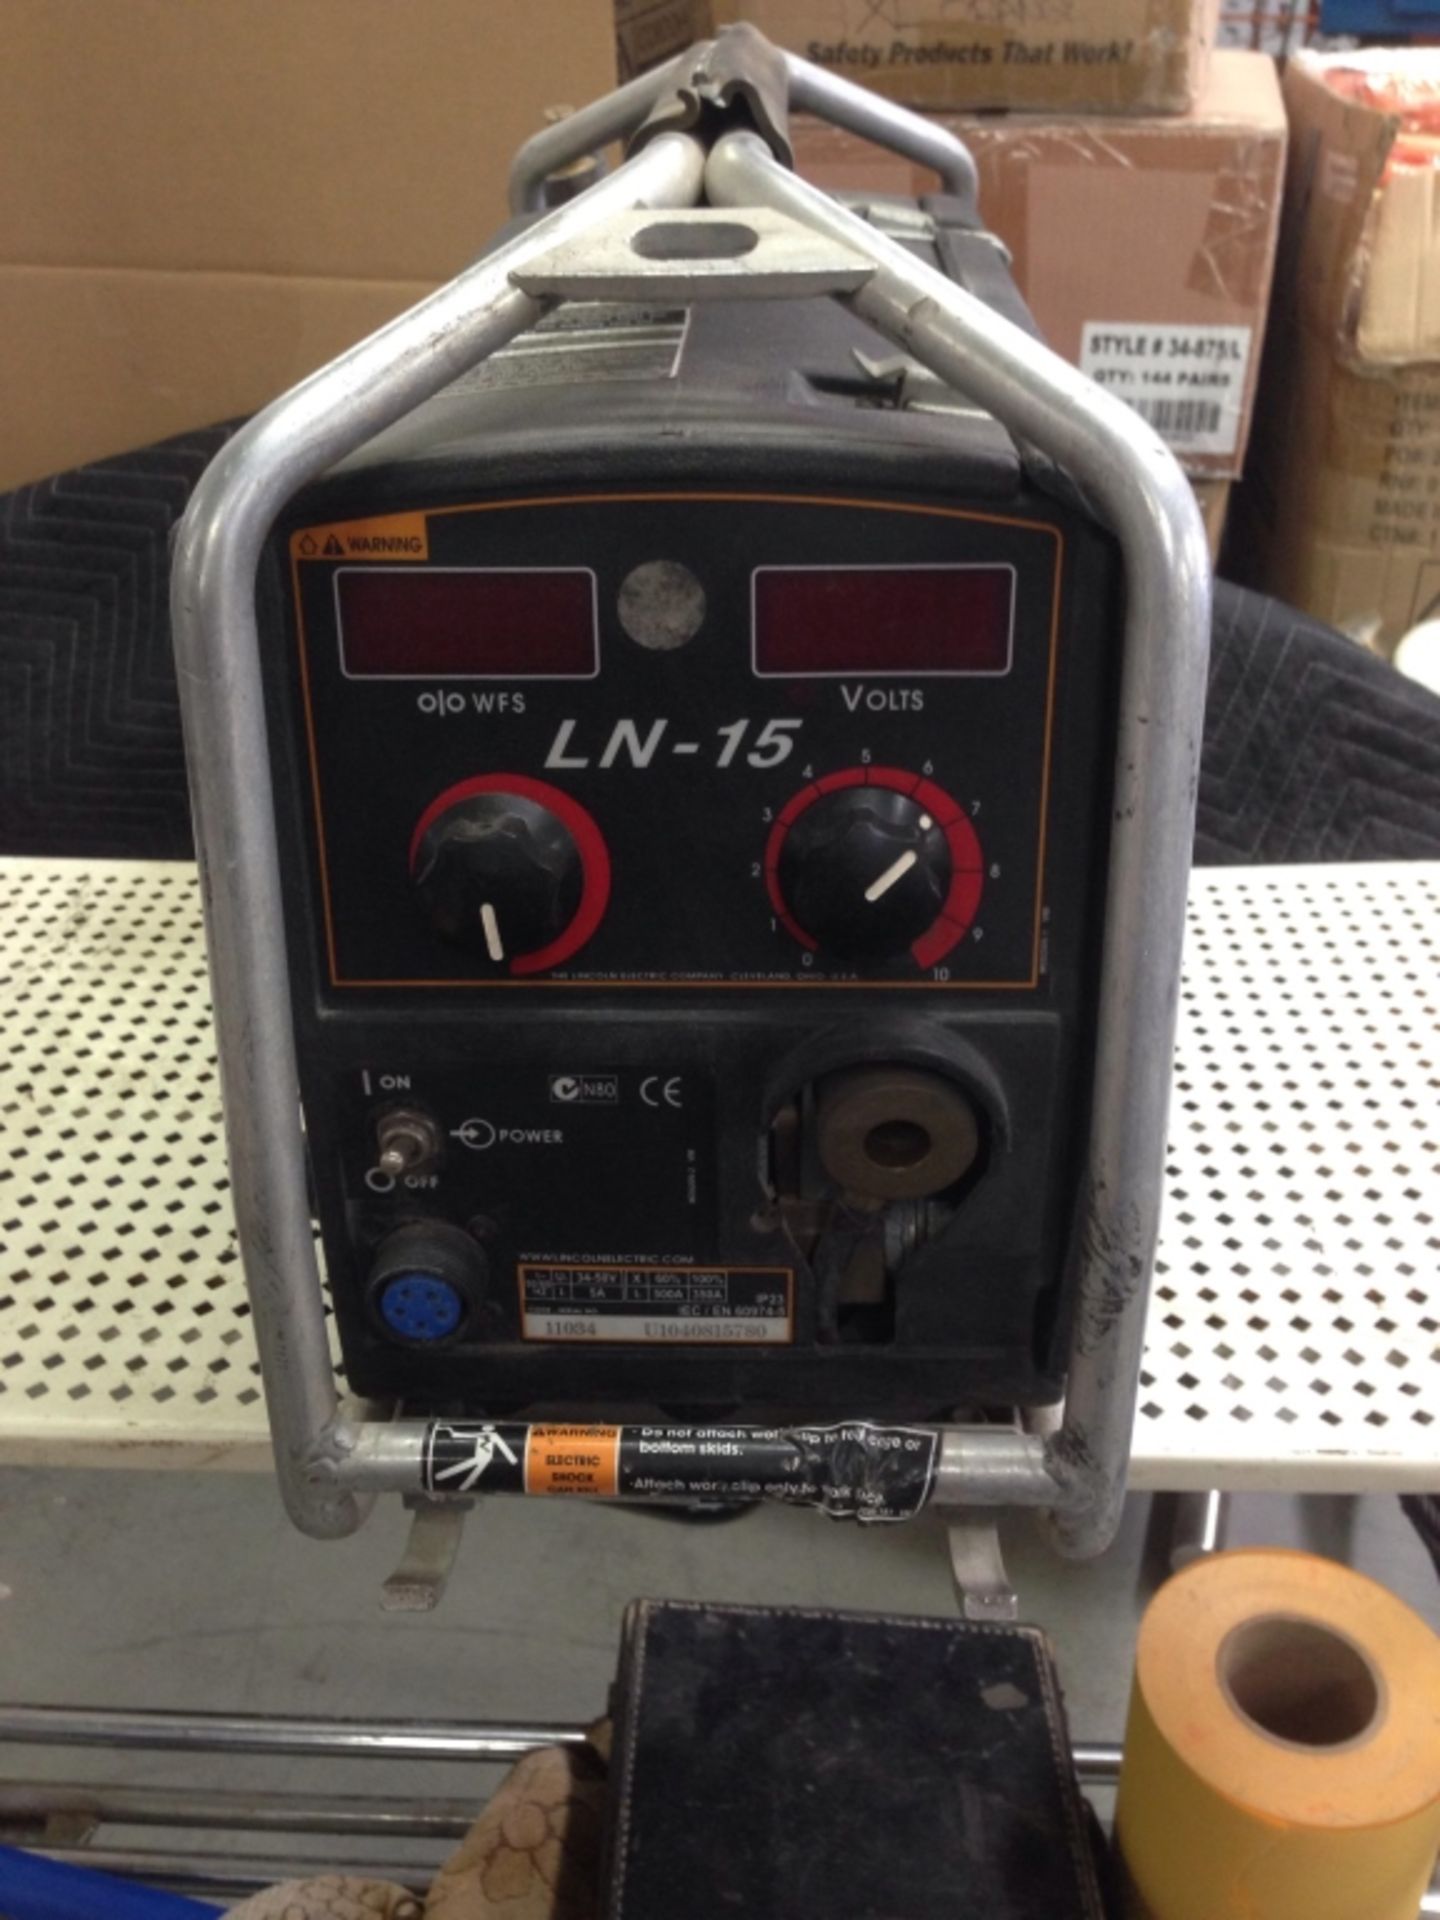 Lincoln electric portable welder - Image 5 of 10